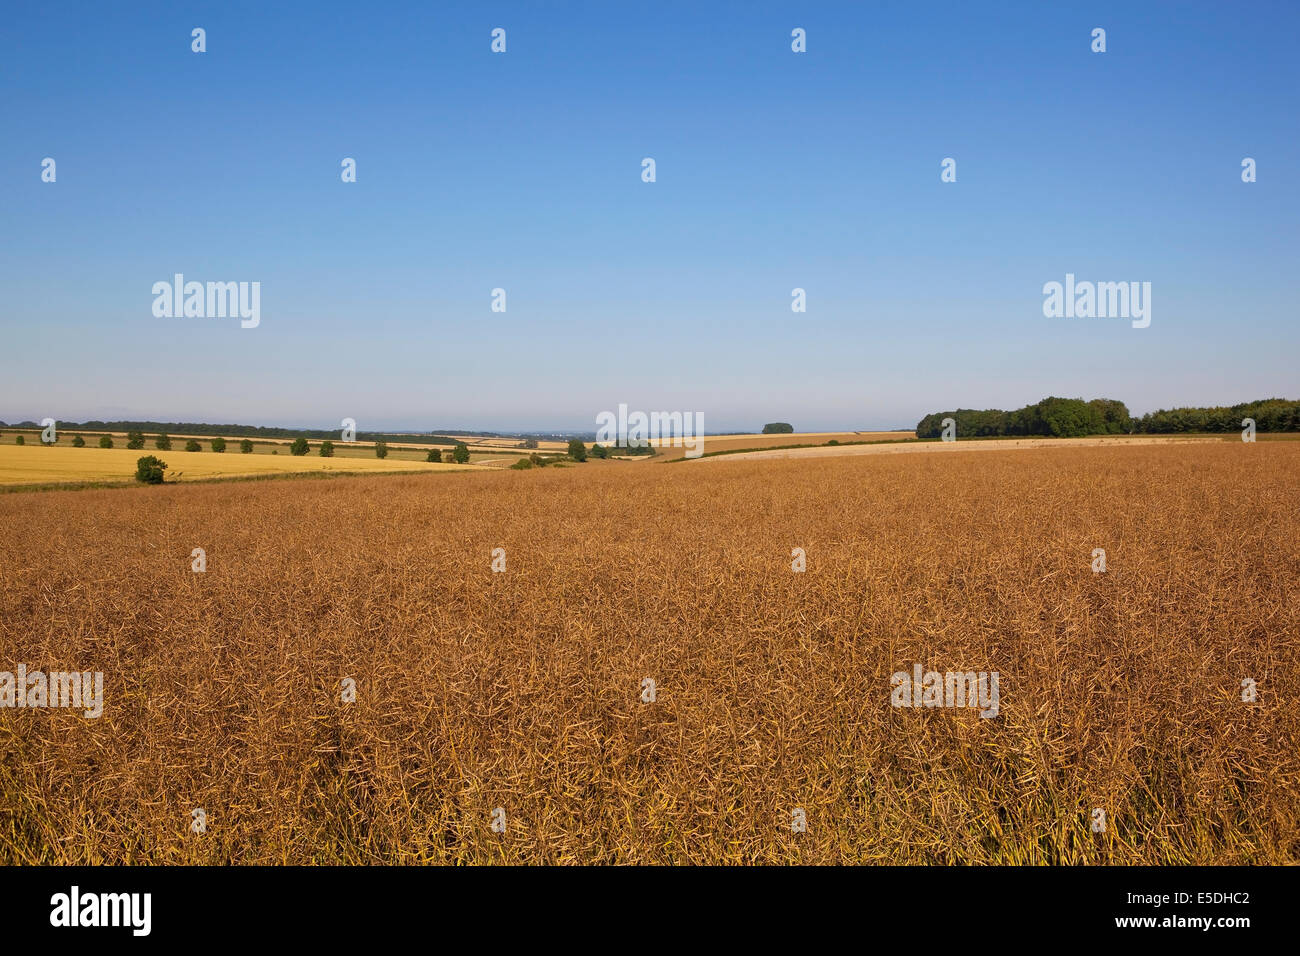 Summer landscape with ripe canola or rapeseed crop and patchwork fields under clear blue skies Stock Photo